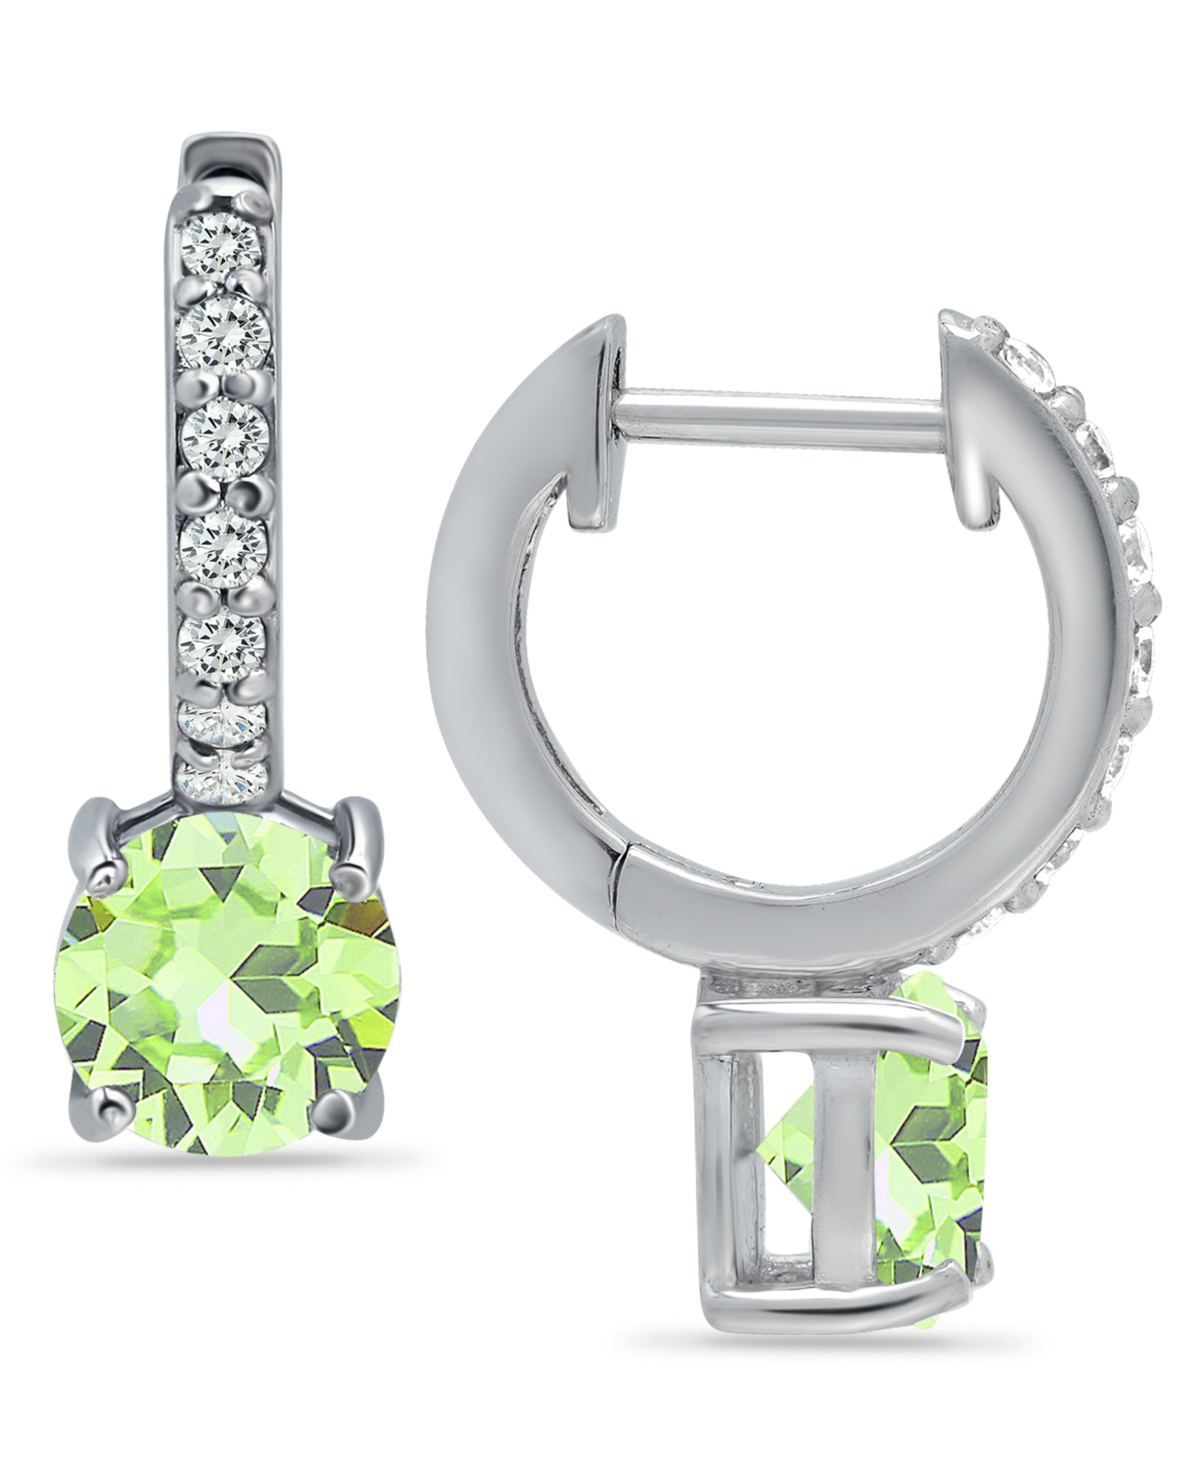 Giani Bernini Colored Cubic Zirconia Huggie Hoop Earrings In Sterling Silver Or 18k Gold Over Silver (also Availab In Light Green,silver